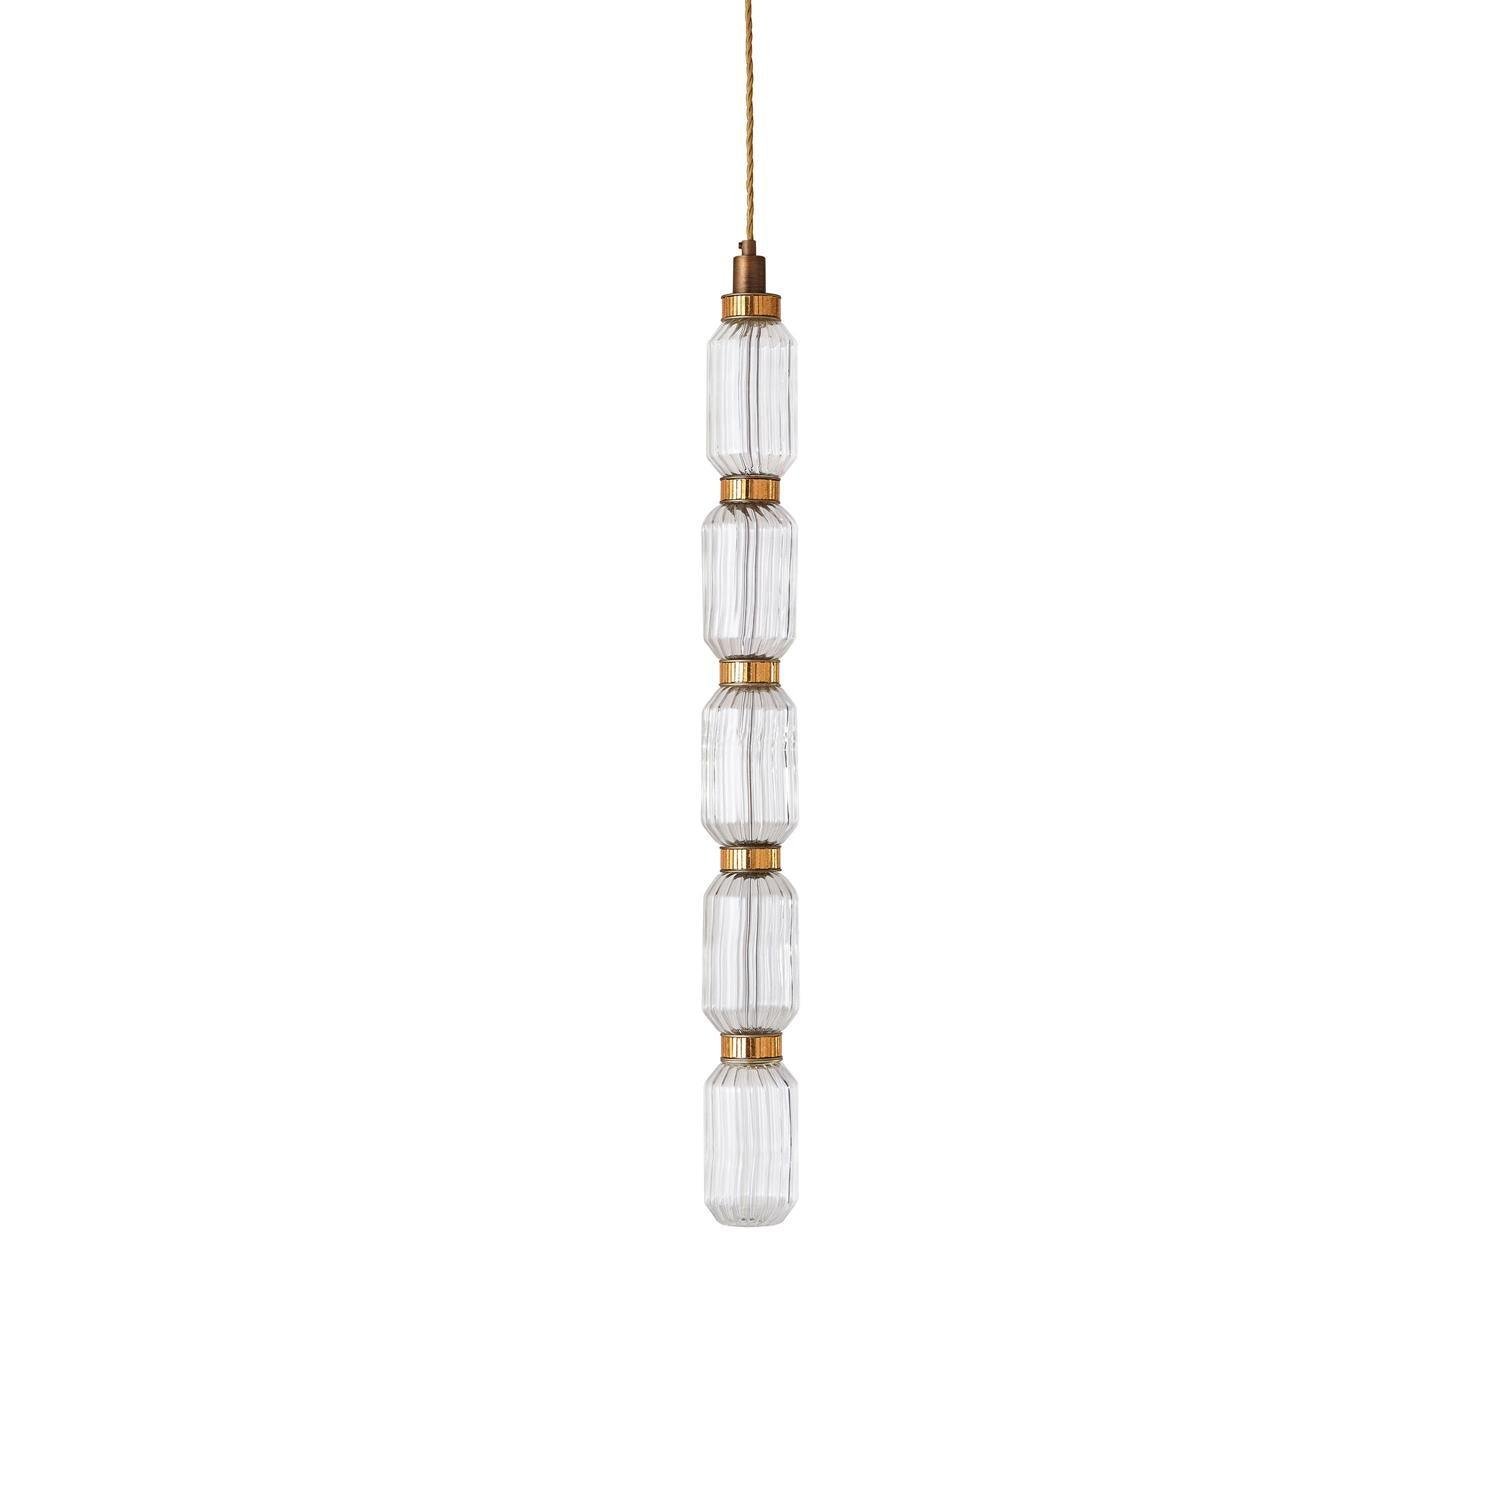 Ballet Pendant Lamp Model G: Clear, Cool Light - Diameter 3.5 inches x Height 35.4 inches (9cm x 90cm)